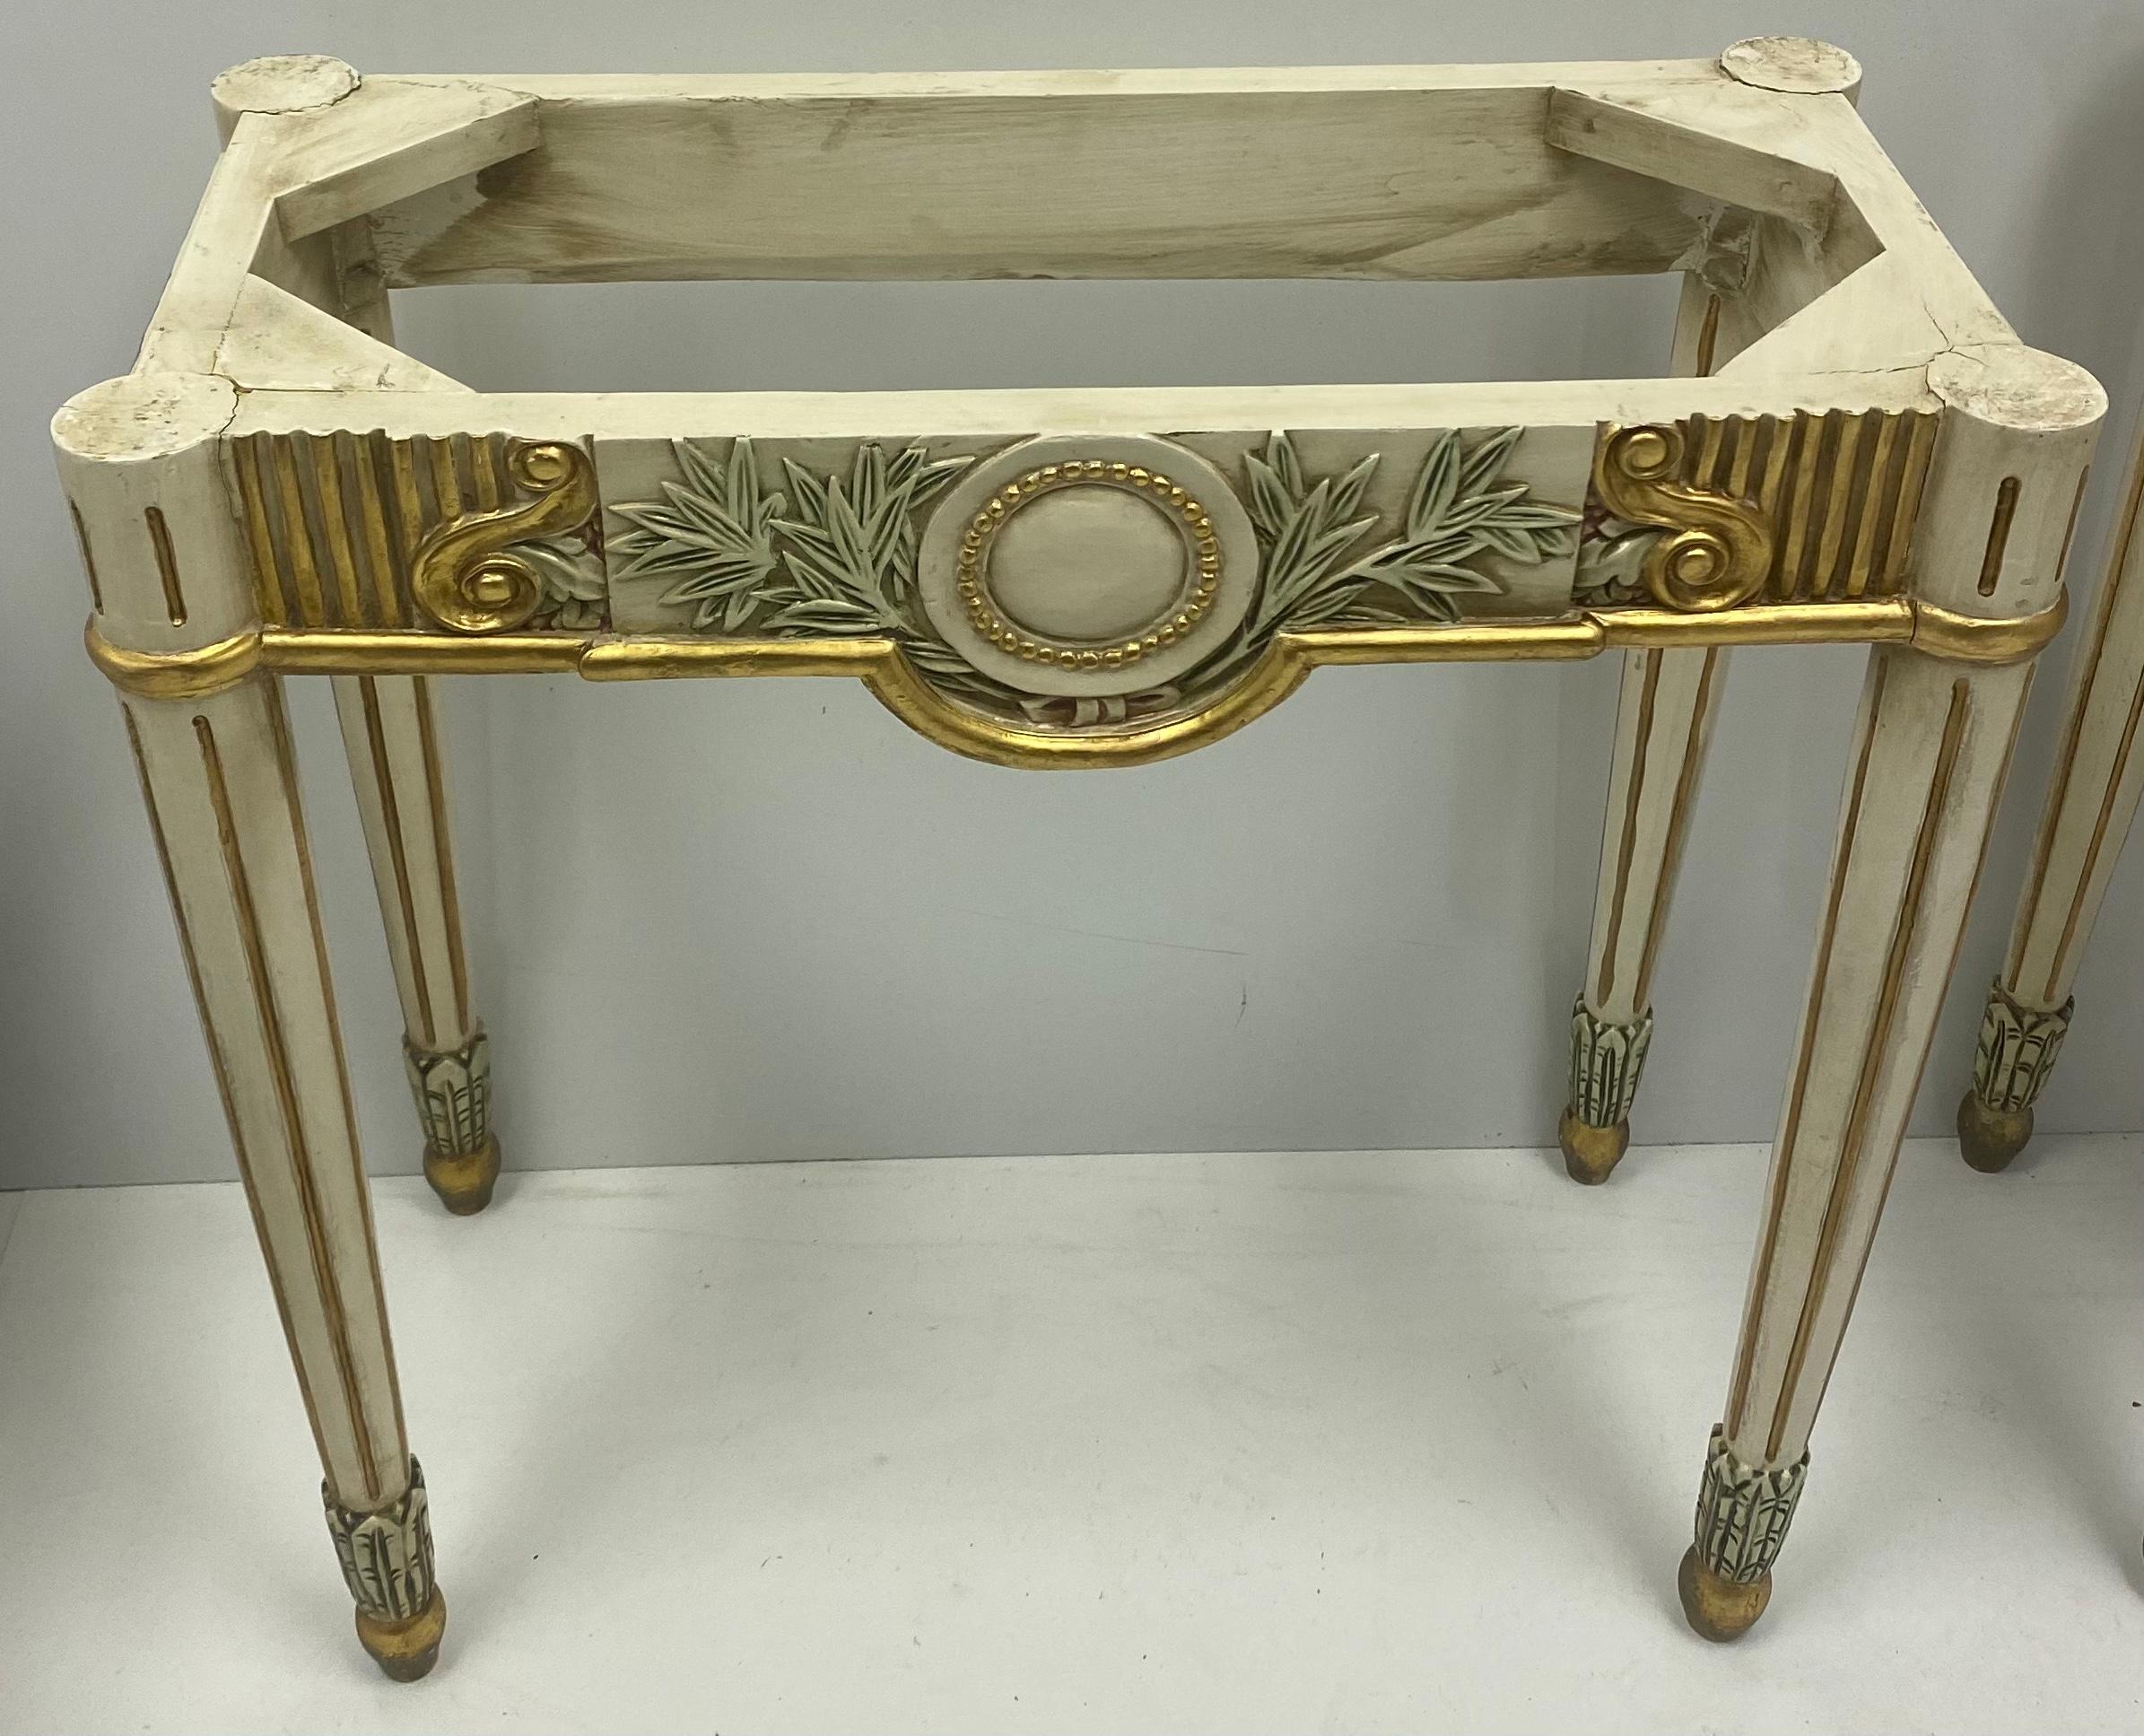 Late 20th Century 1970s Italian Painted Giltwood and Stone Console Tables, a Pair